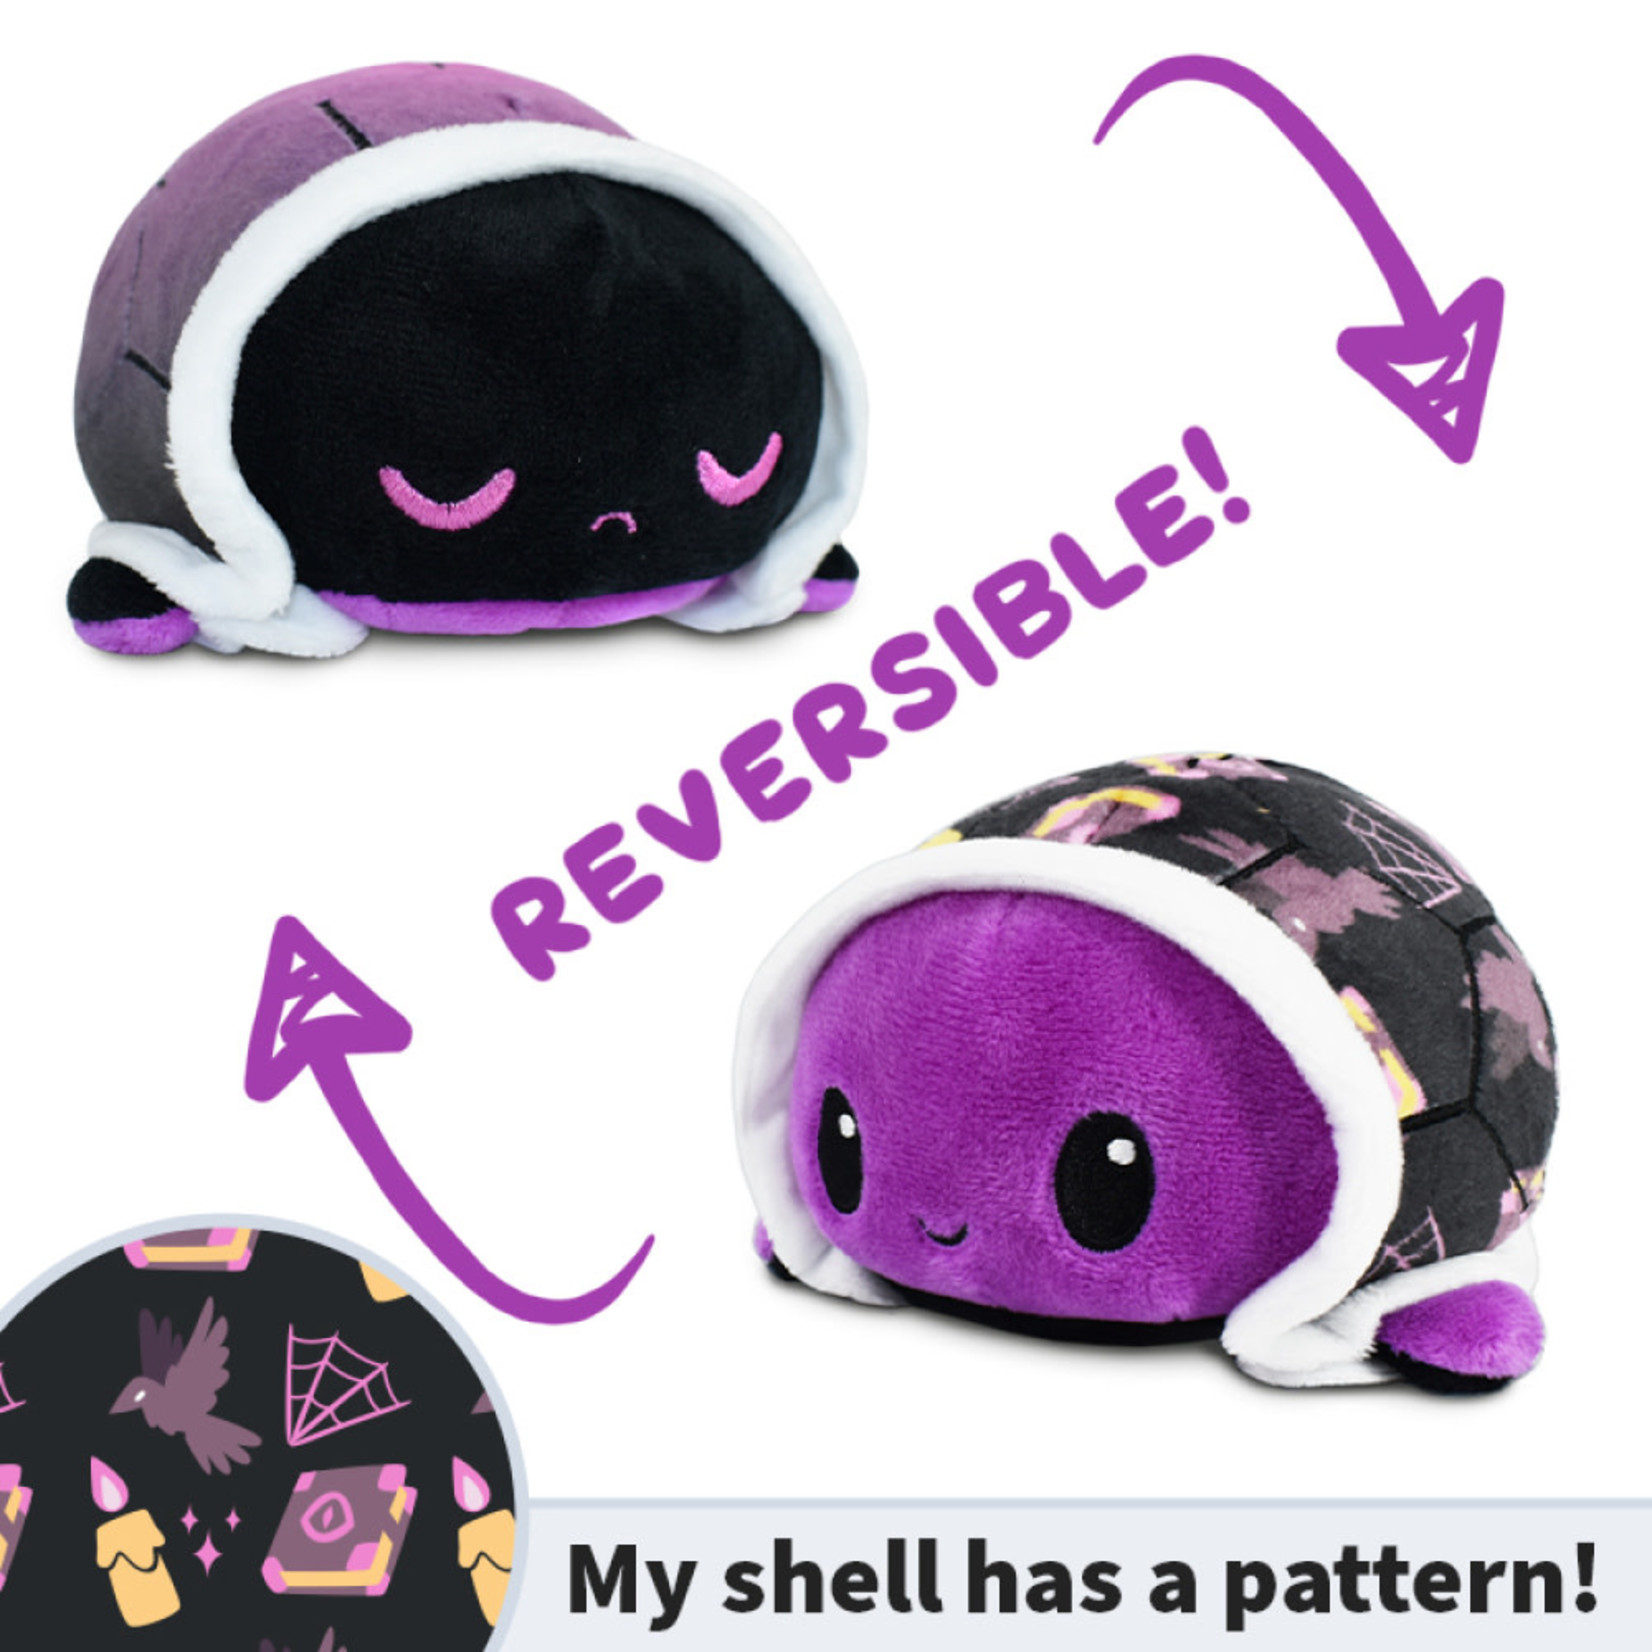 Unstable Games/Teeturtle Reversible Turtle Plush Witchcraft